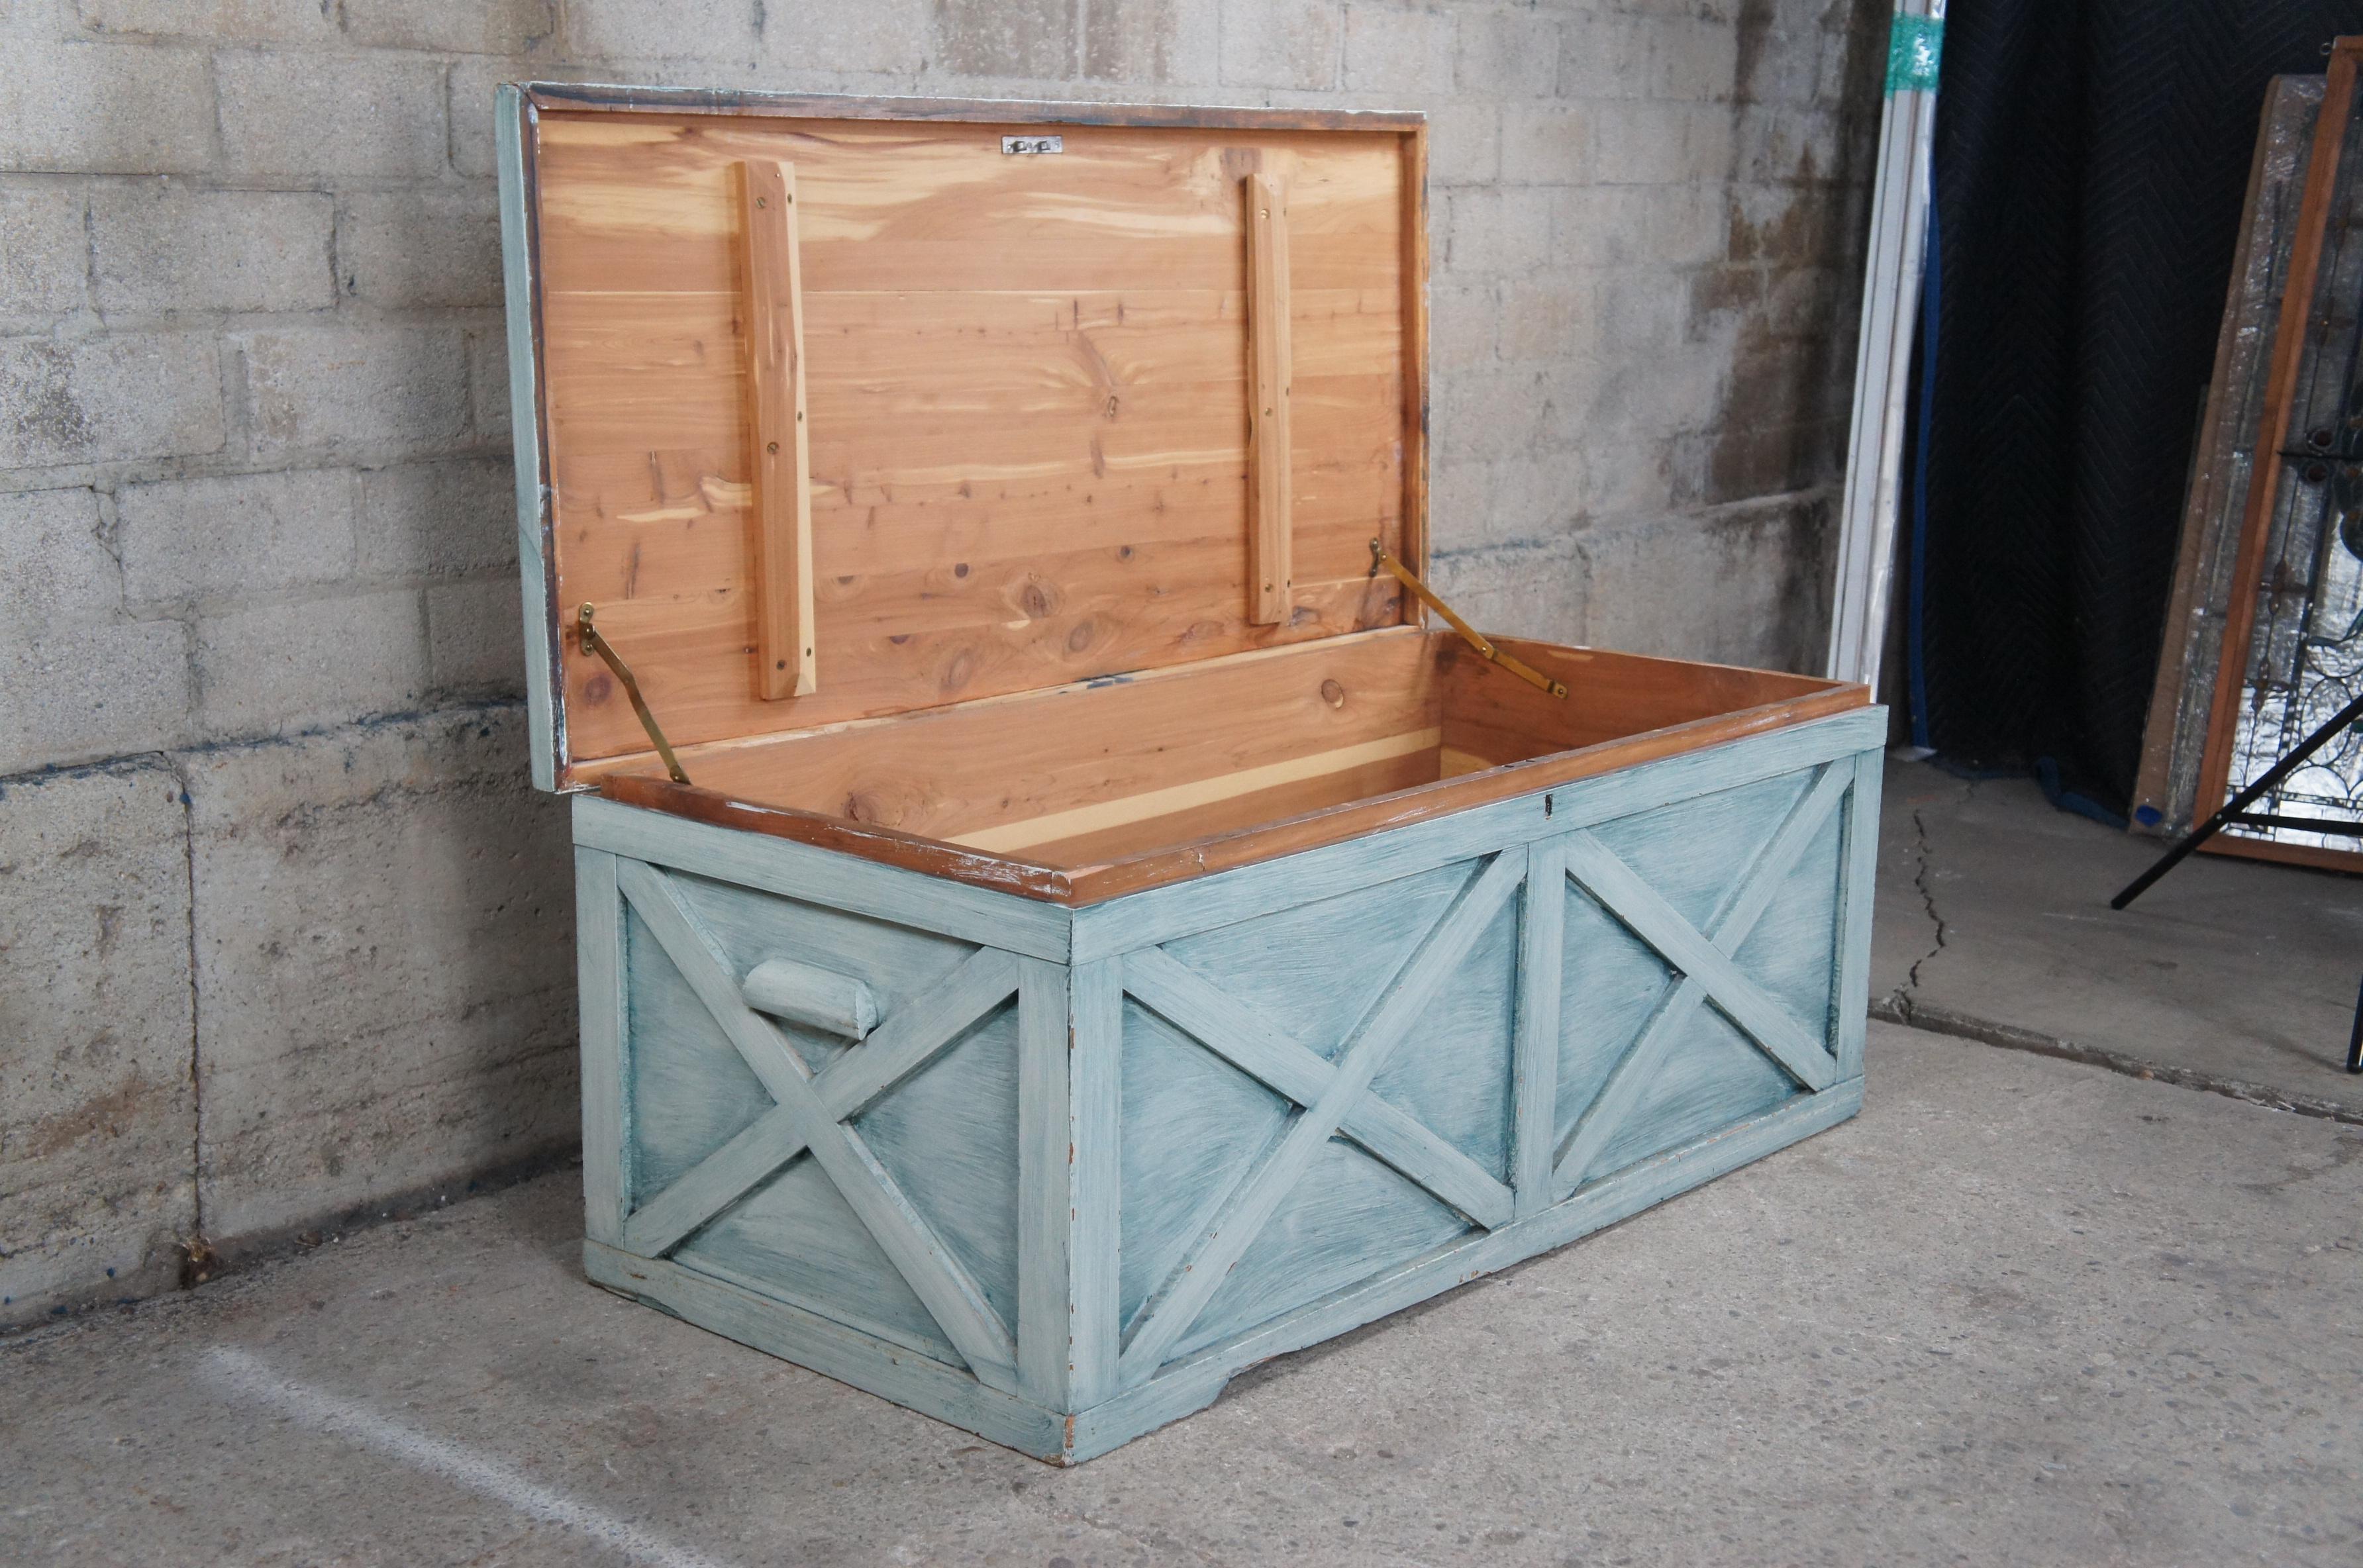 Vintage Green Painted Lattice Framed Cedar Lined Trunk Blanket Chest Boho Chic In Good Condition For Sale In Dayton, OH